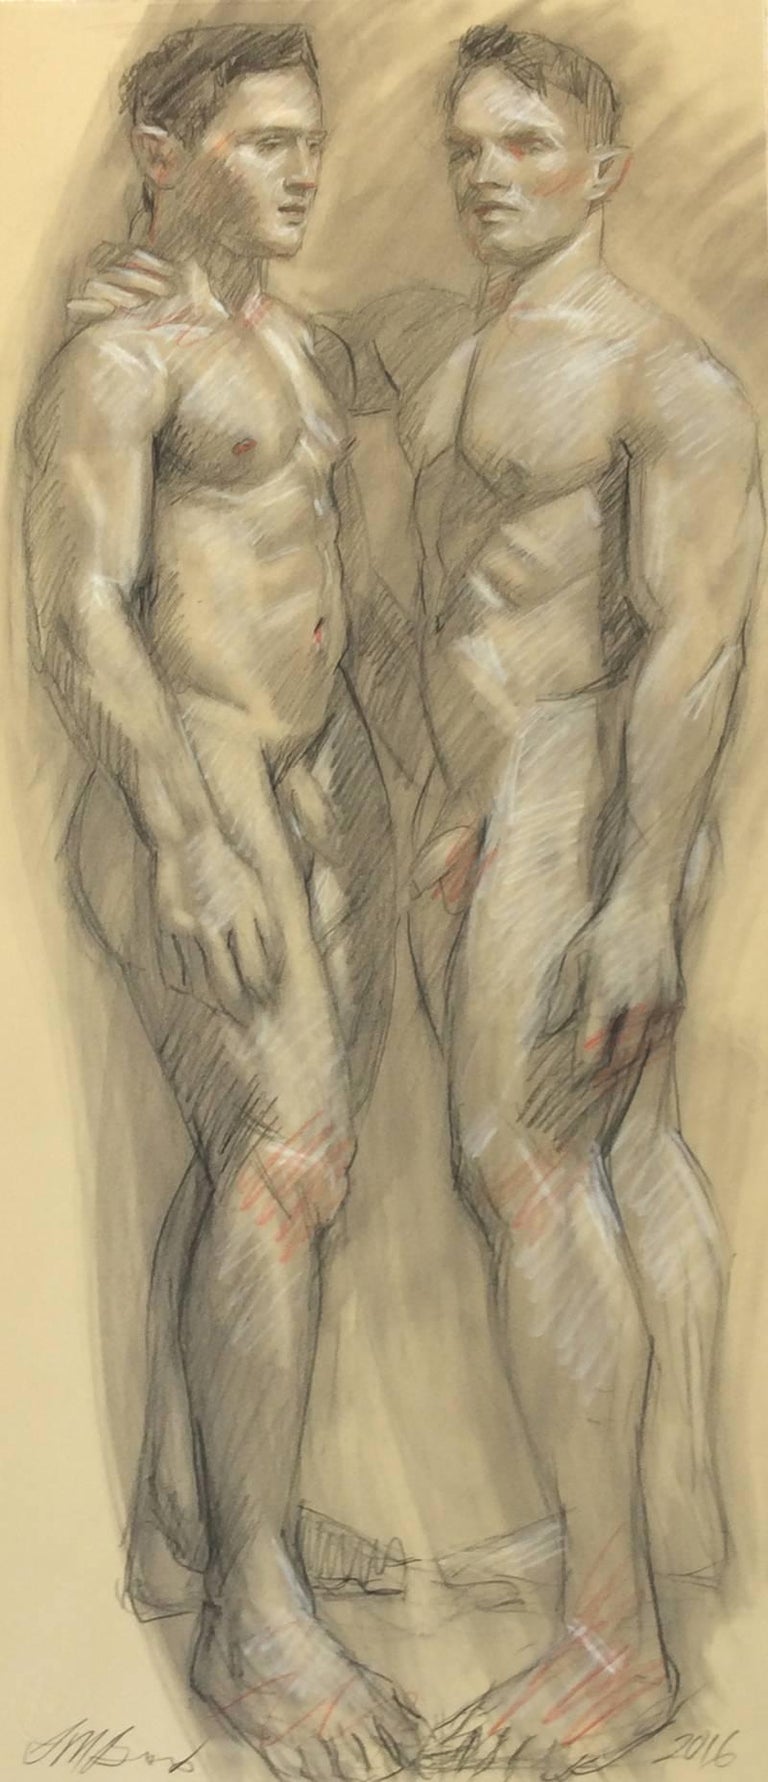 MB 808 (Figurative Charcoal Drawing on Paper of Two Male Nudes Models)  - Art by Mark Beard